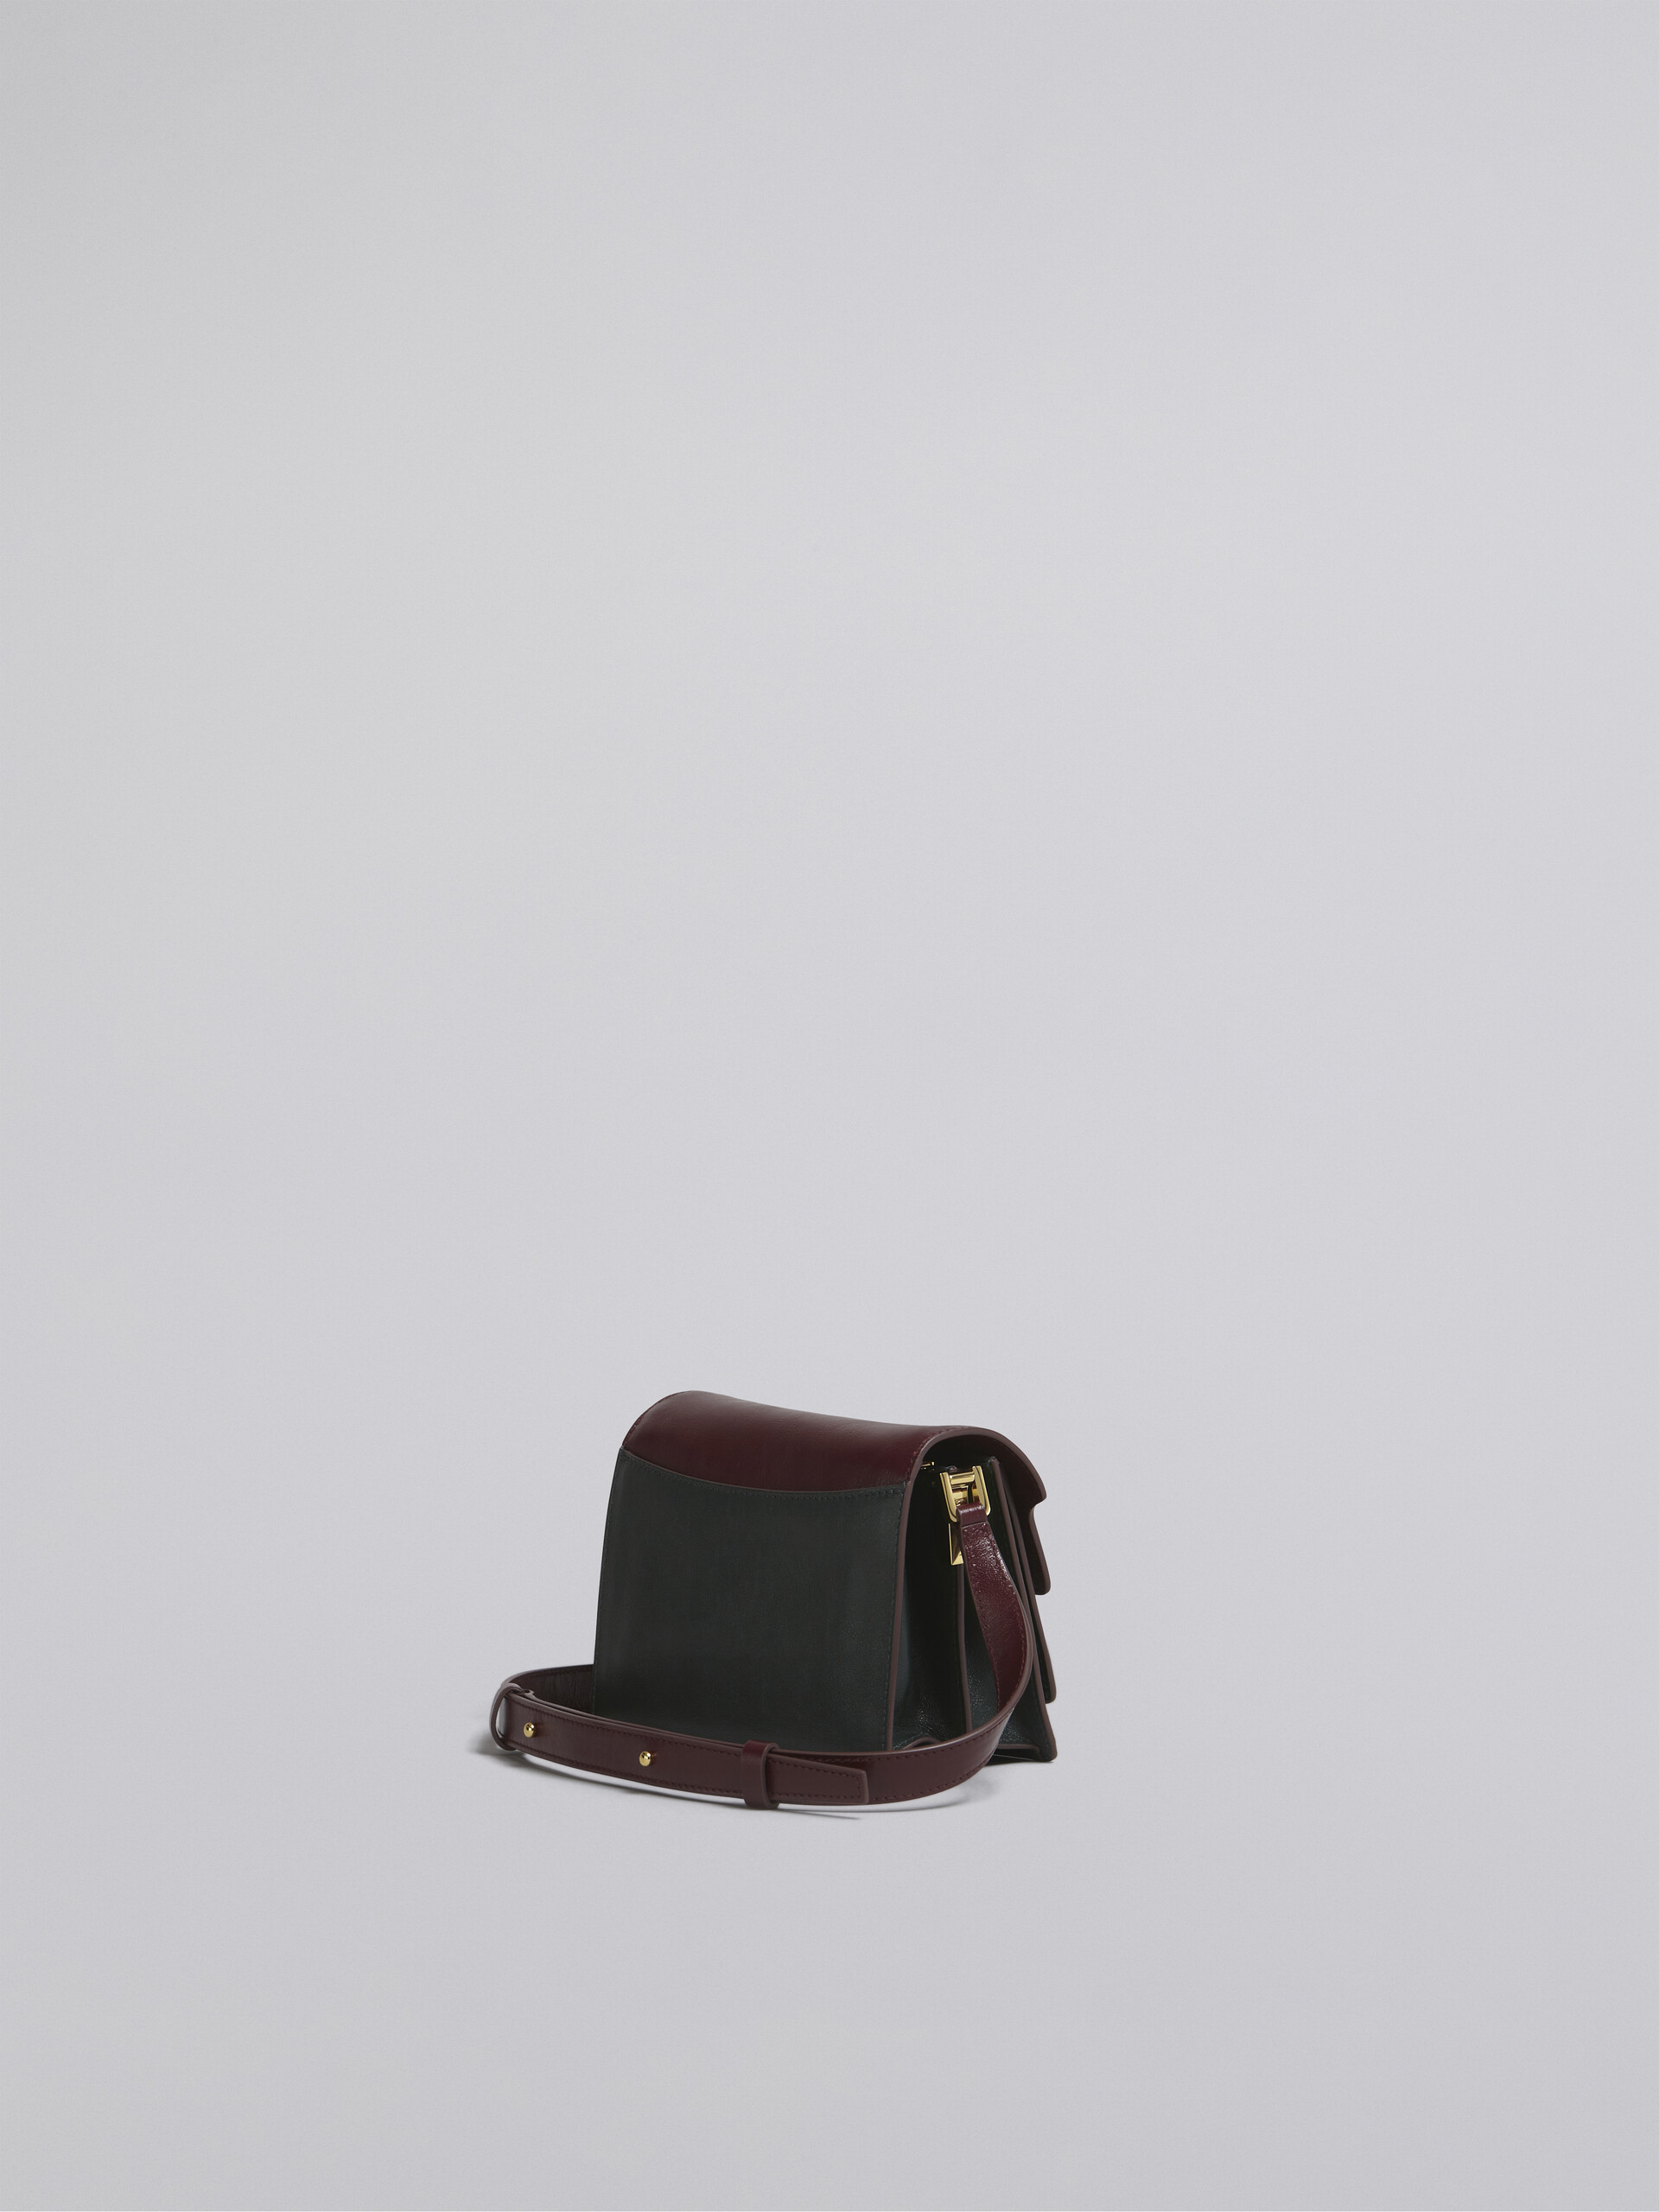 TRUNK SOFT mini bag in green and burgundy leather - Shoulder Bags - Image 2